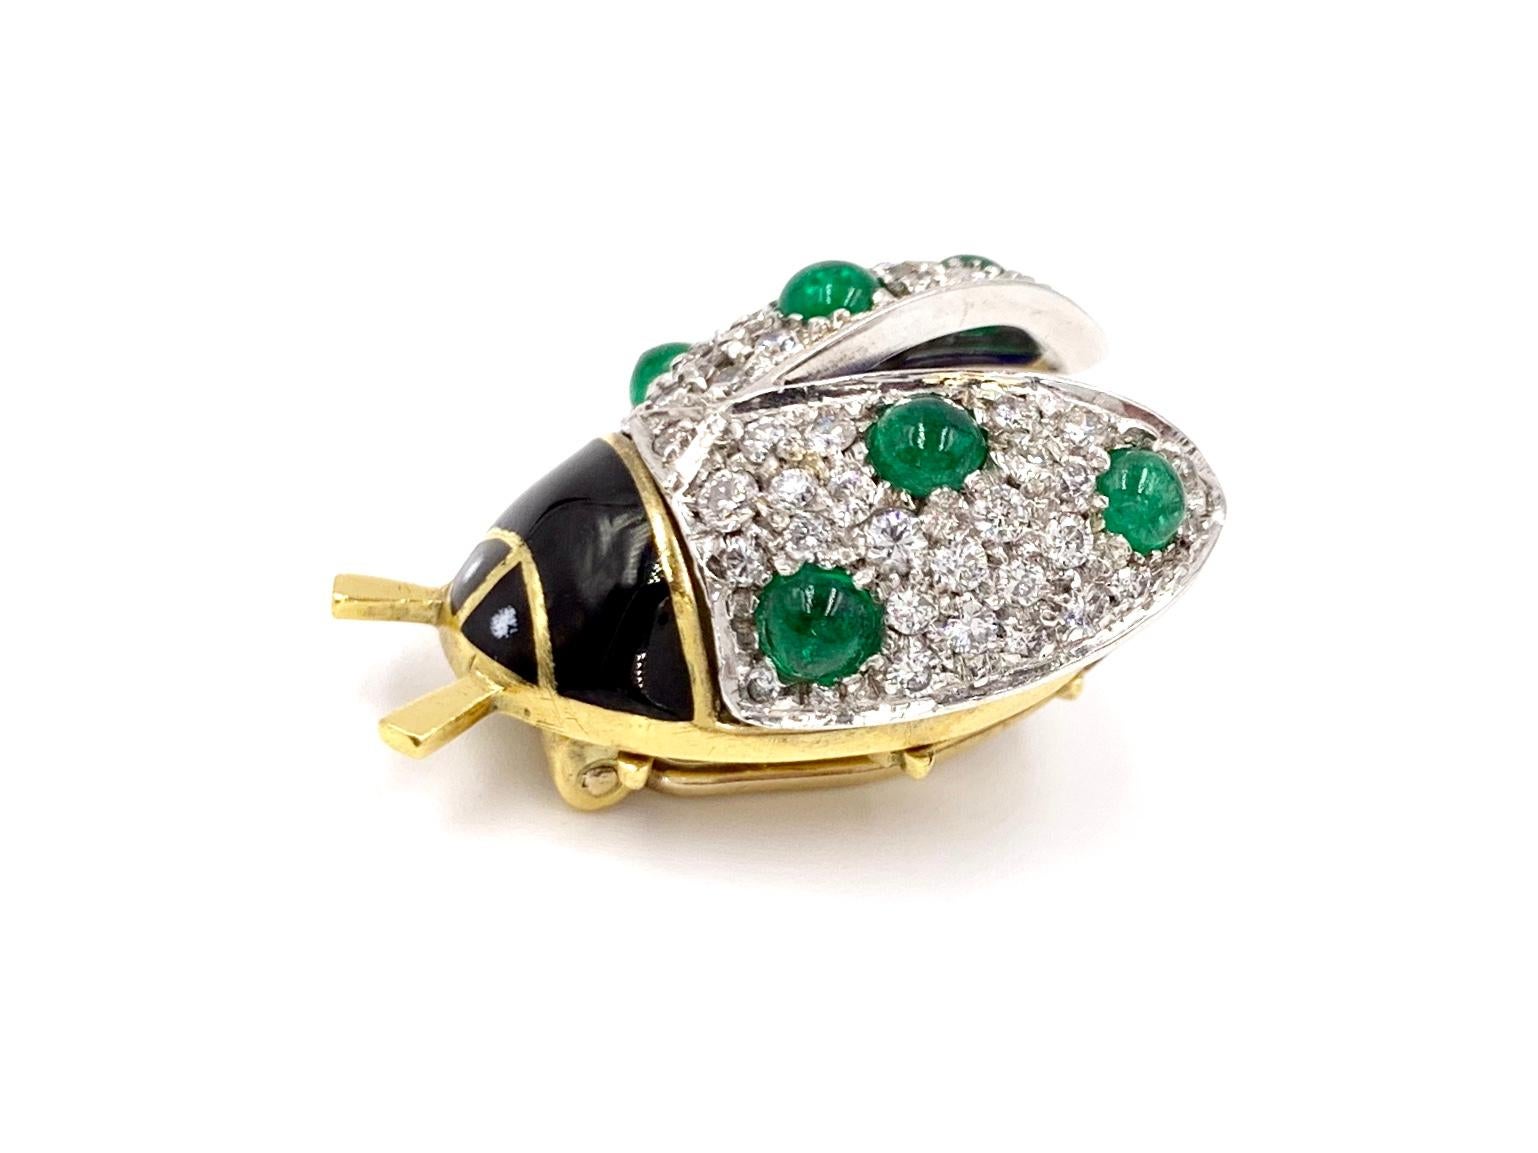 Adorable 18 karat yellow and white gold beetle brooch featuring 53 round diamonds, perfectly pavé set at .88 carats total weight. Diamond quality is approximately G color, SI1 clarity. 6 well saturated cabochon emeralds have a total weight of 1.10